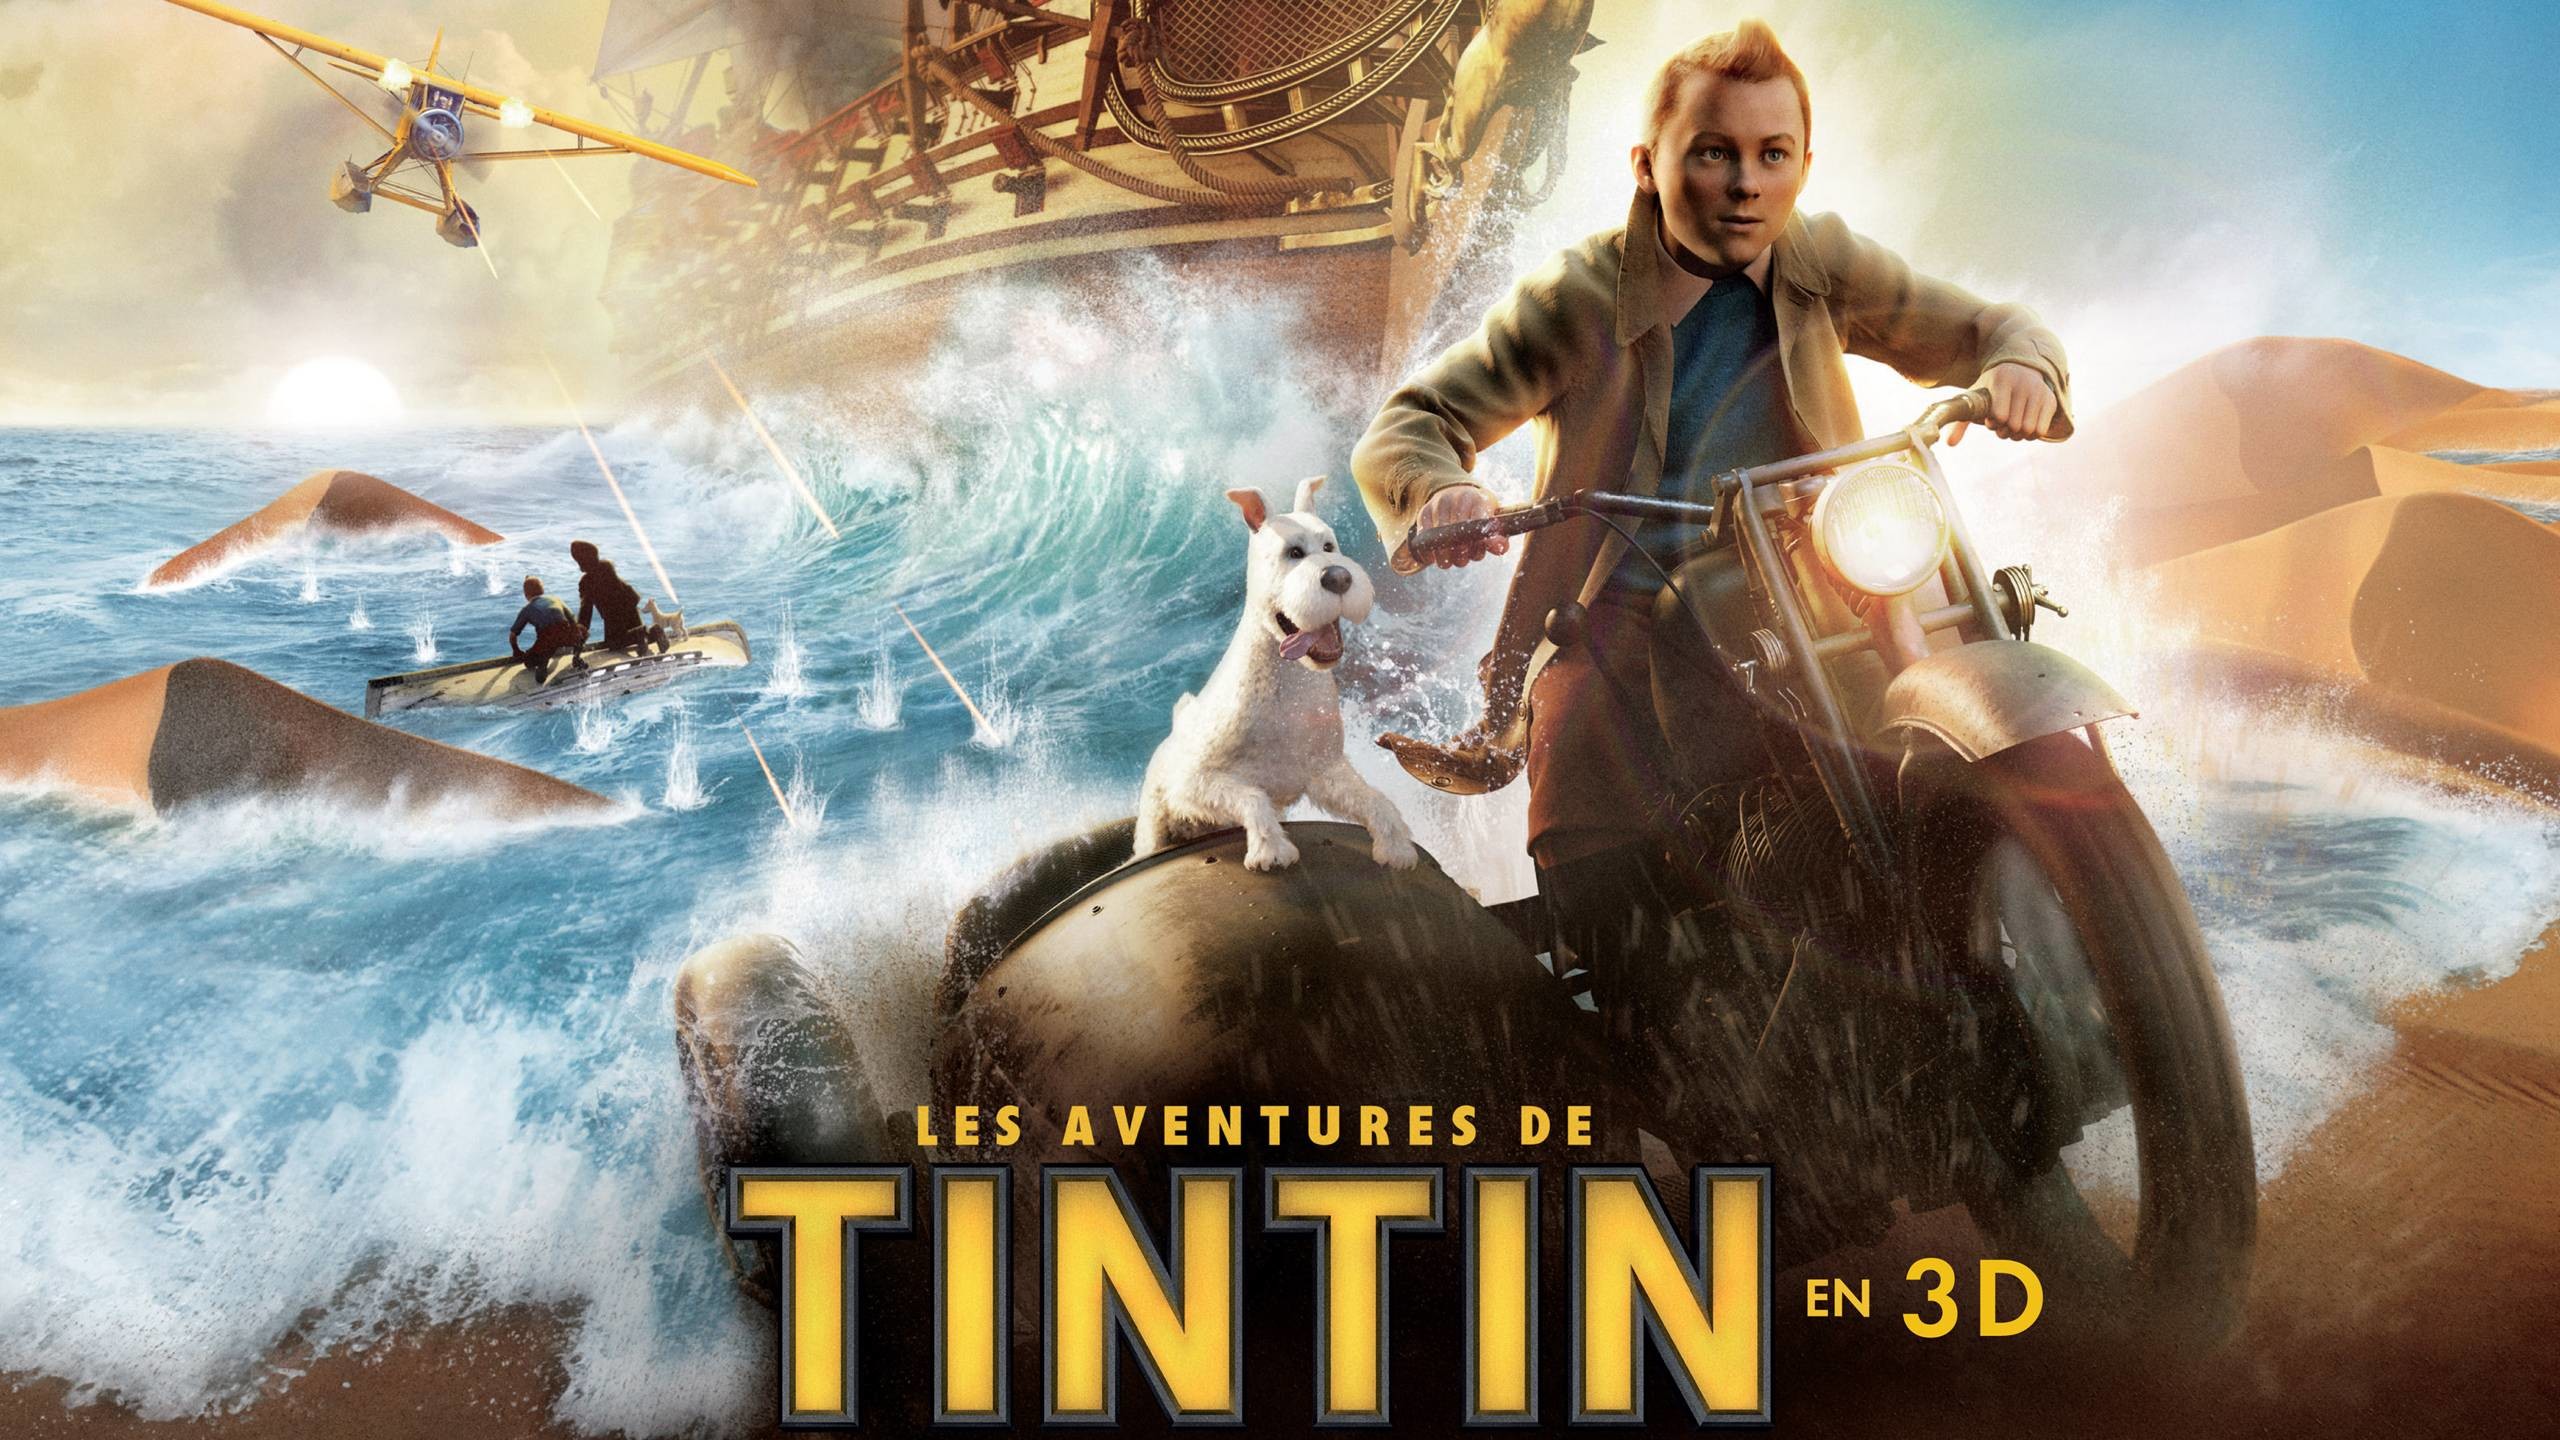 2560x1440 Wallpapers Tagged With TINTIN | TINTIN HD Wallpapers | Page 1